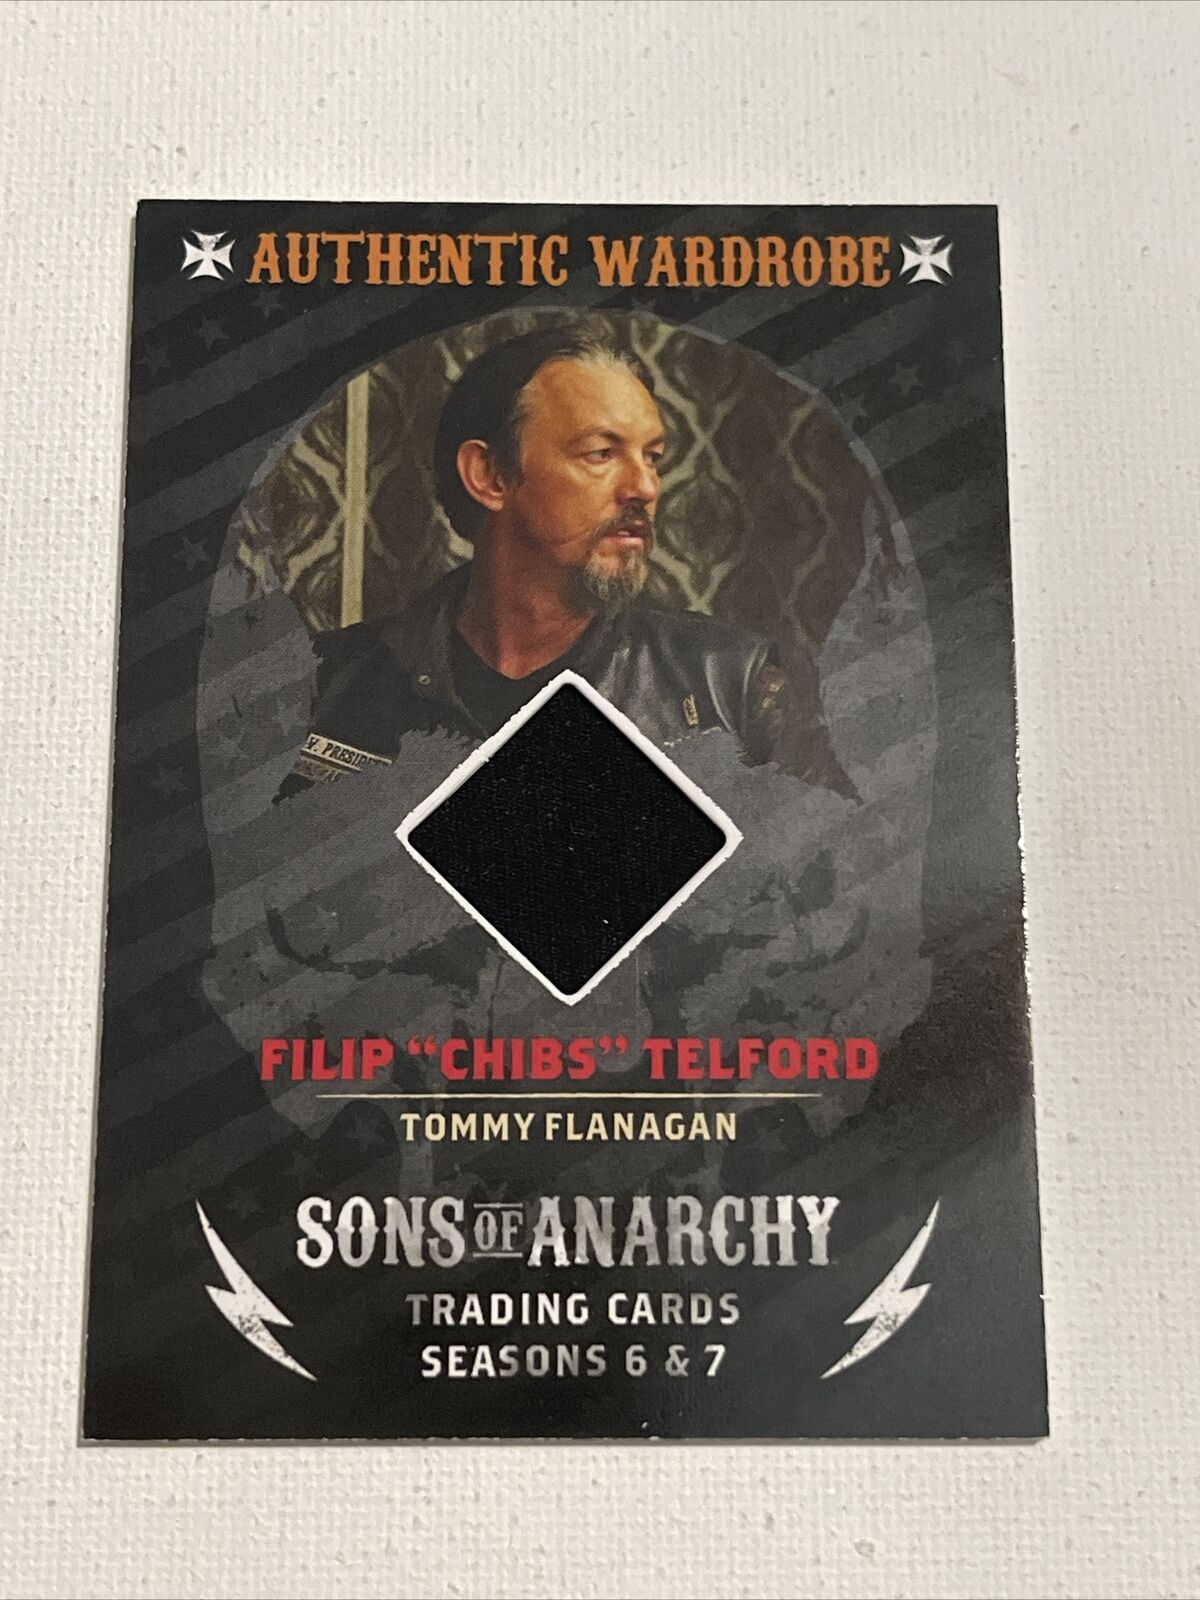 2015 Sons Of Anarchy Authentic Wardrobe Card Of Filip “Chibs” Telford #M01 SP